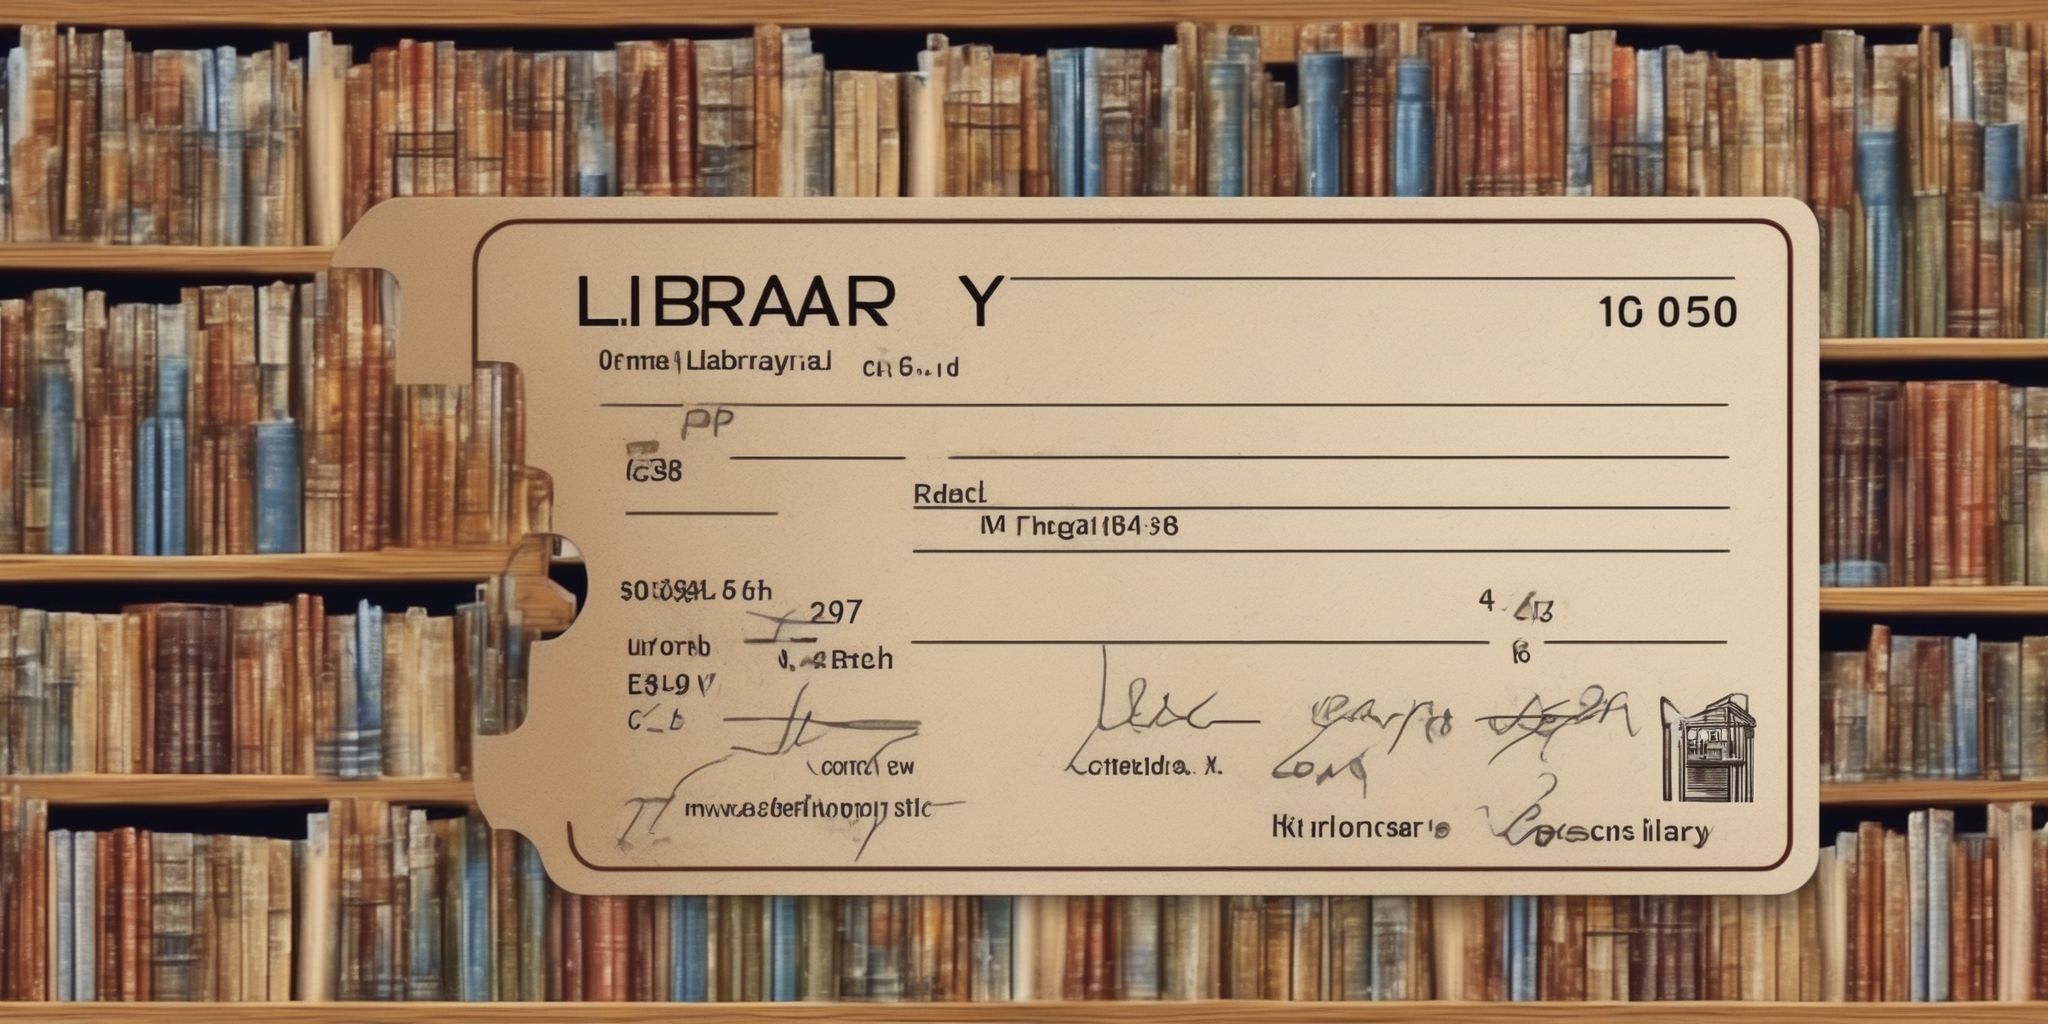 Library card  in realistic, photographic style